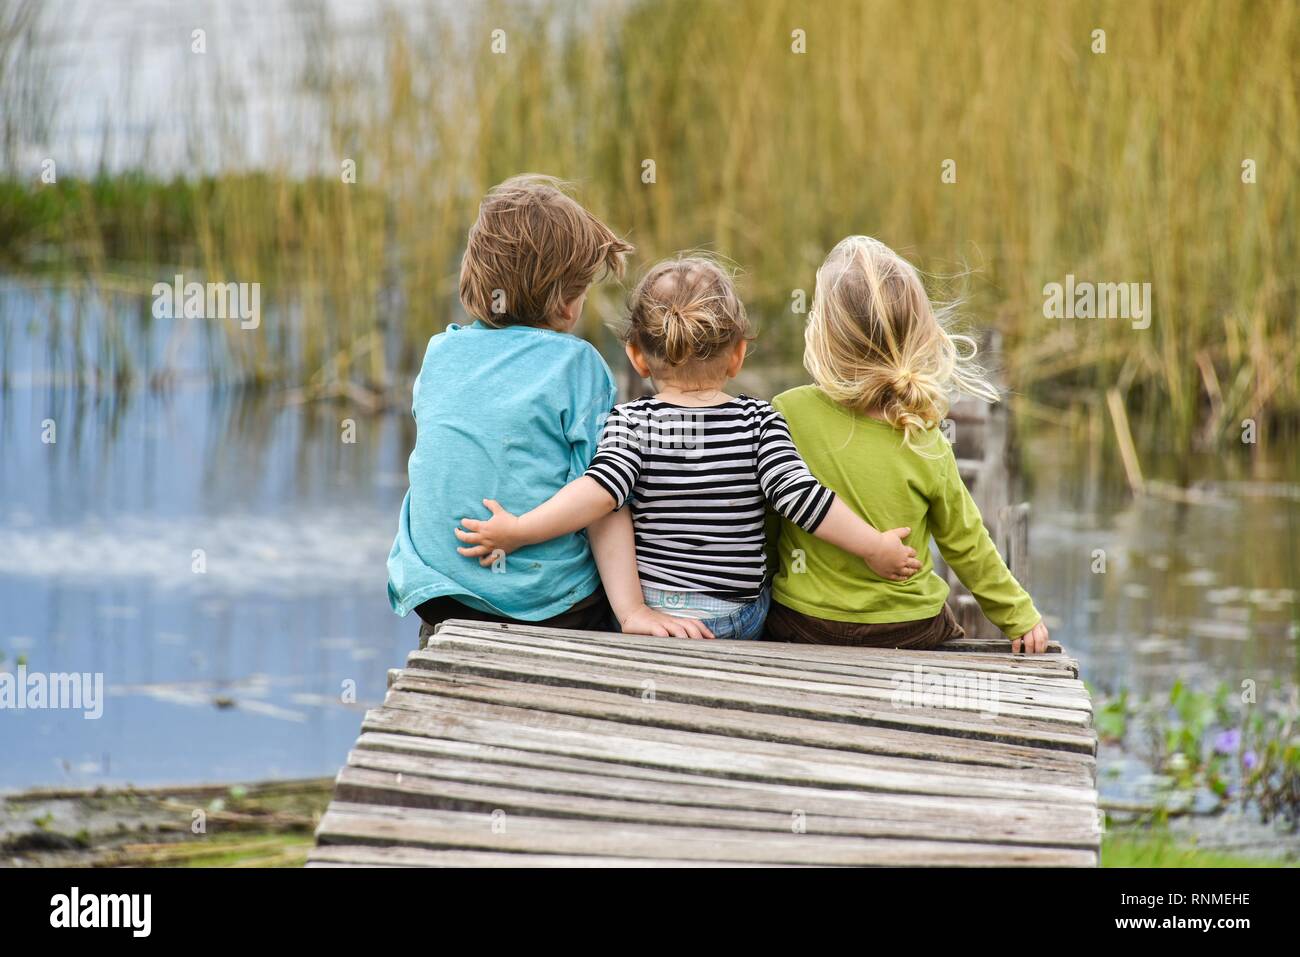 Three toddlers sitting together on an old jetty, back view, Patagonia, Argentina Stock Photo